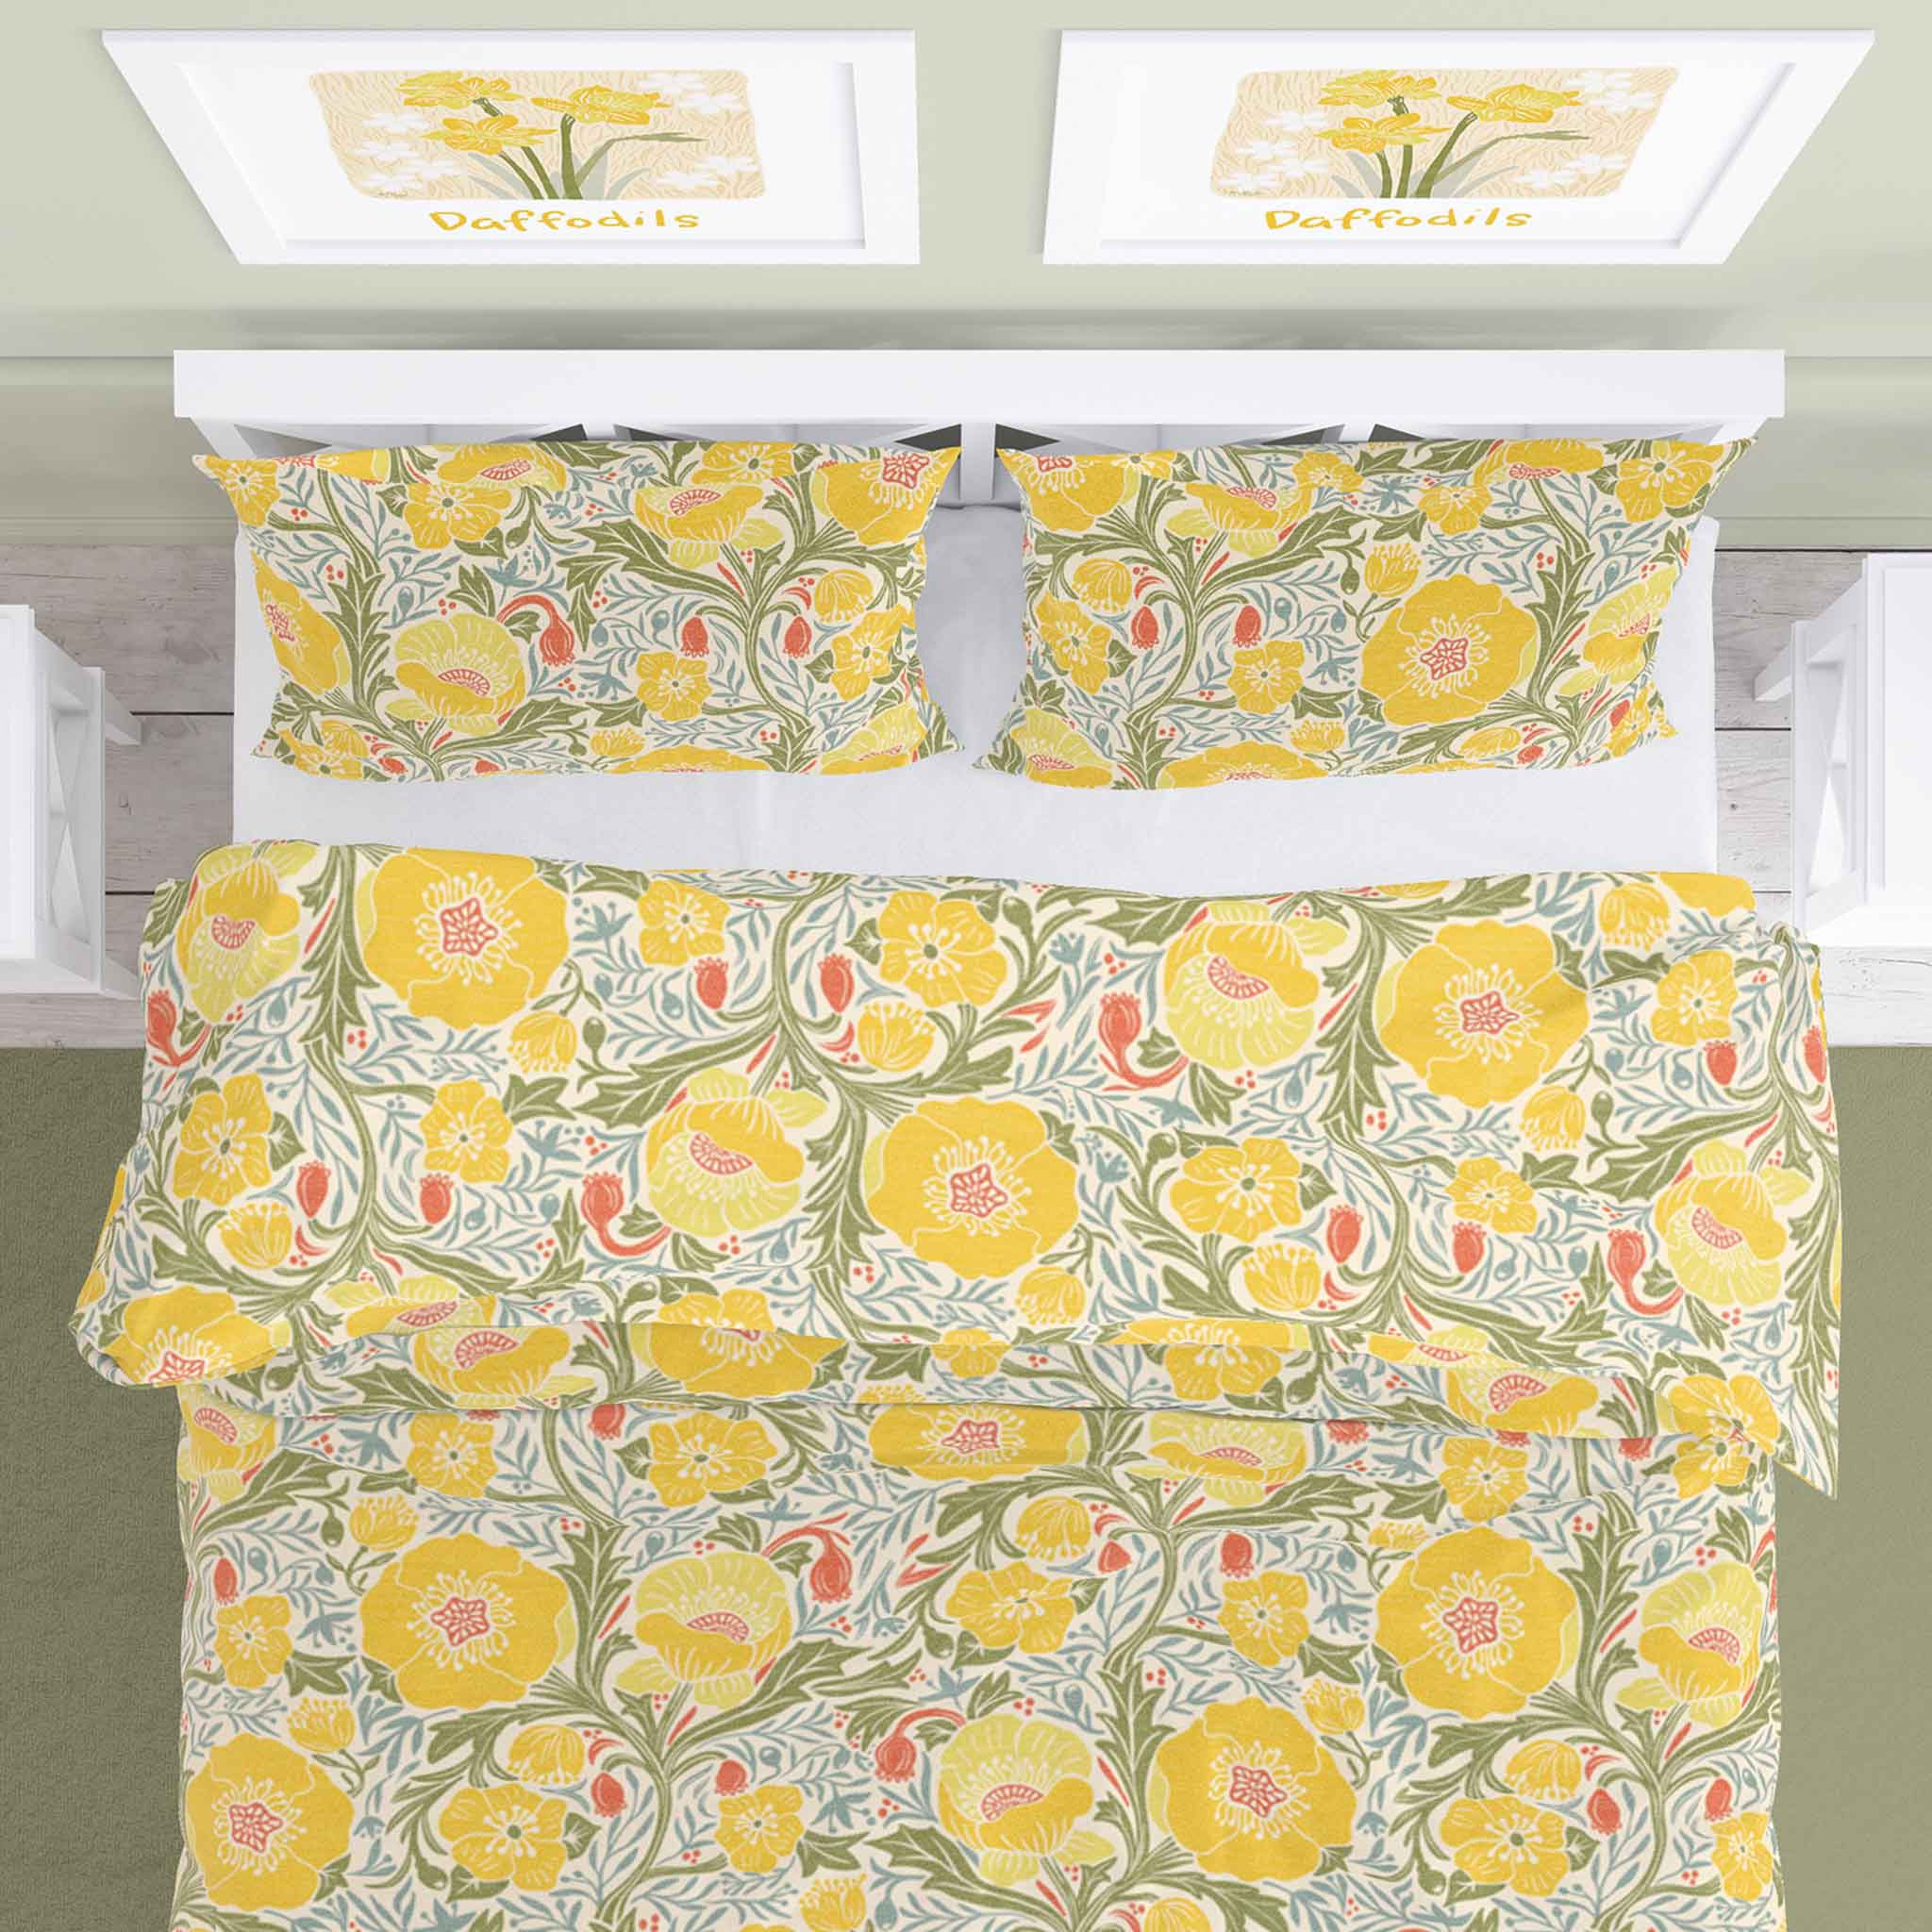 Large bright Yellow Poppies 100% Cotton Duvet Cover